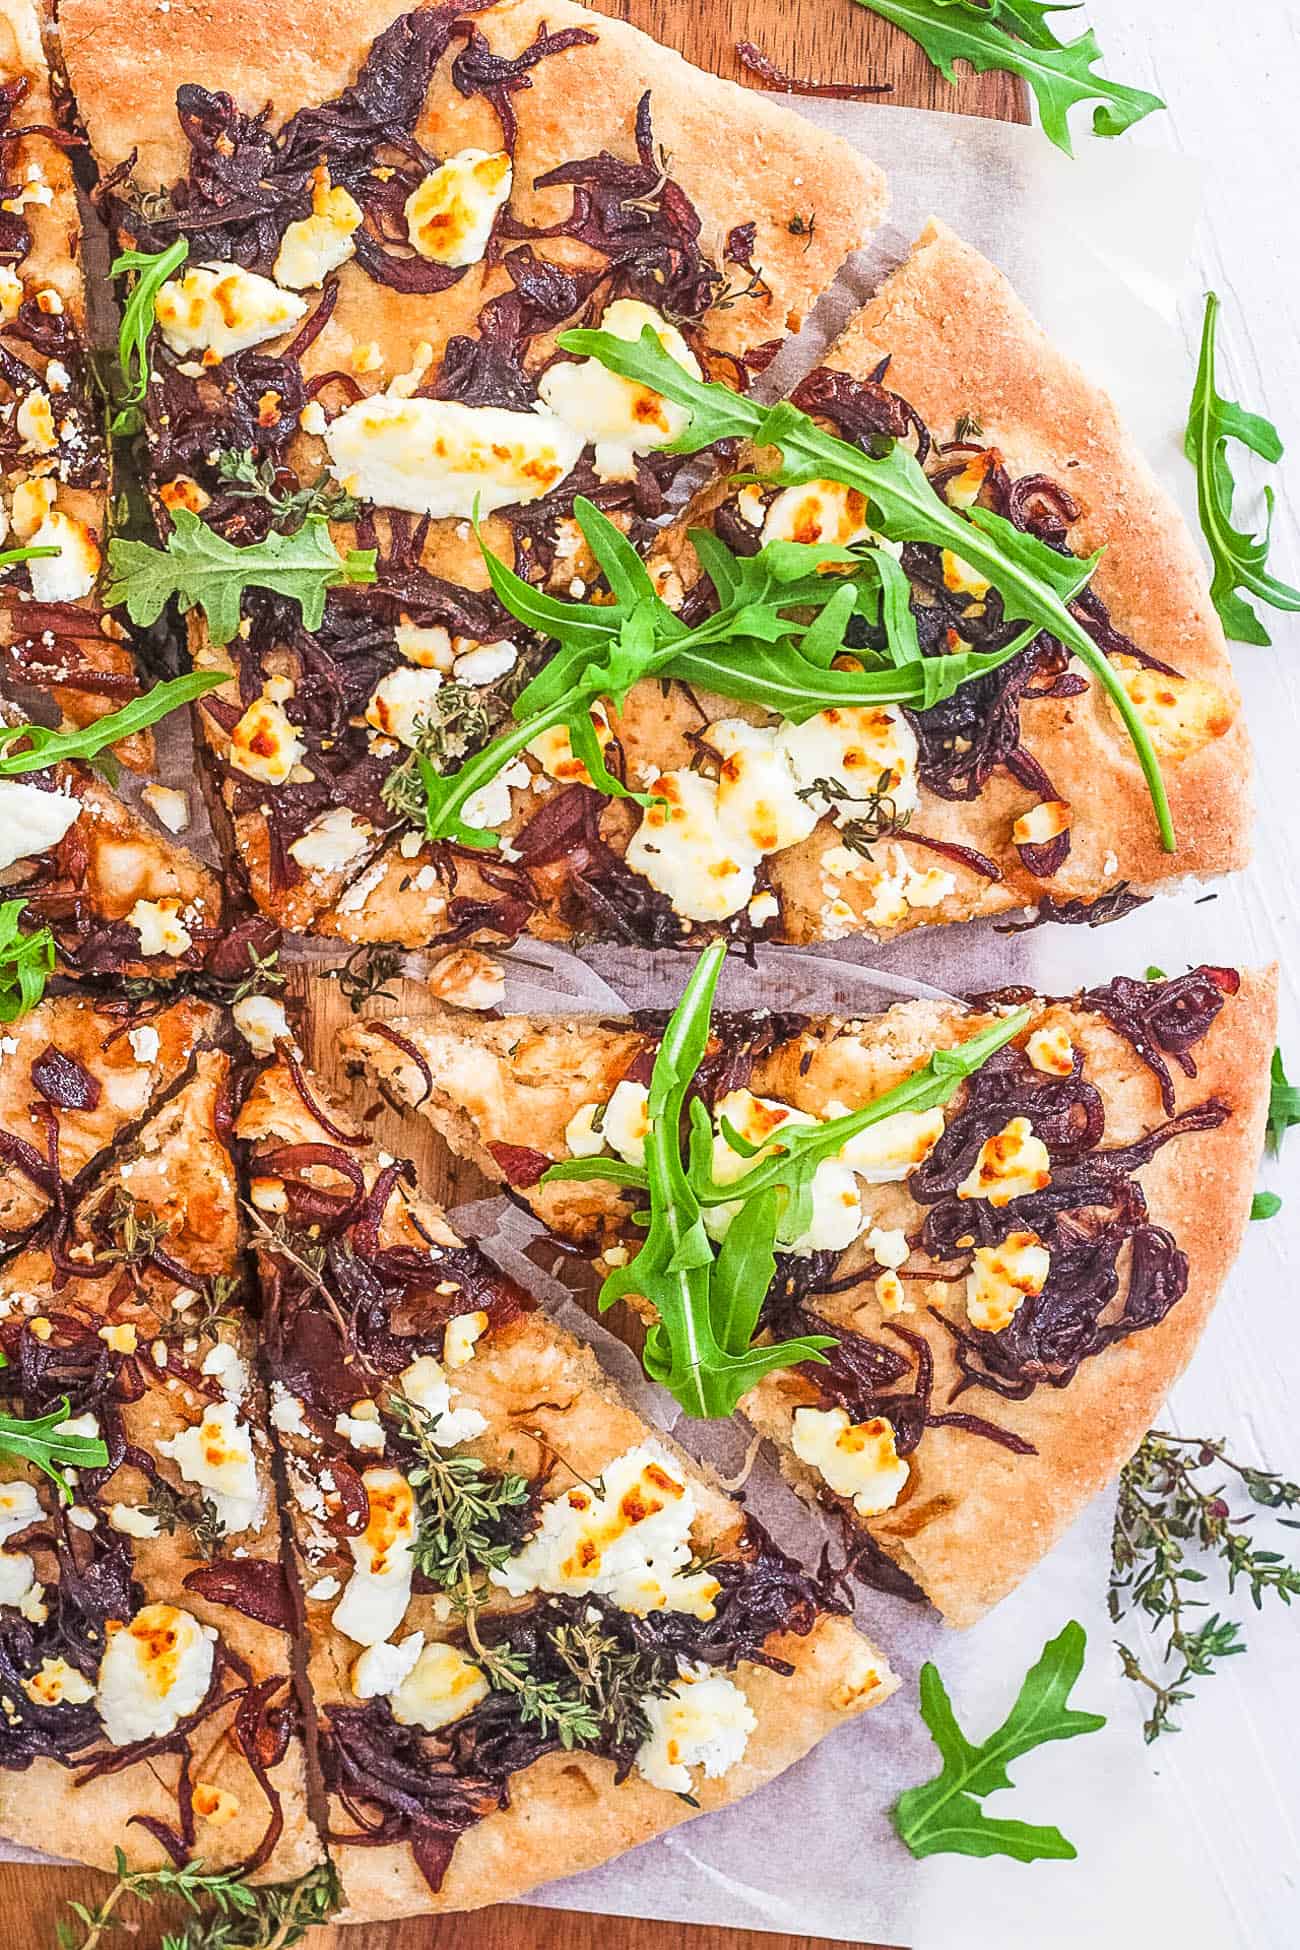 Goat Cheese Pizza Recipe With Caramelized Onions